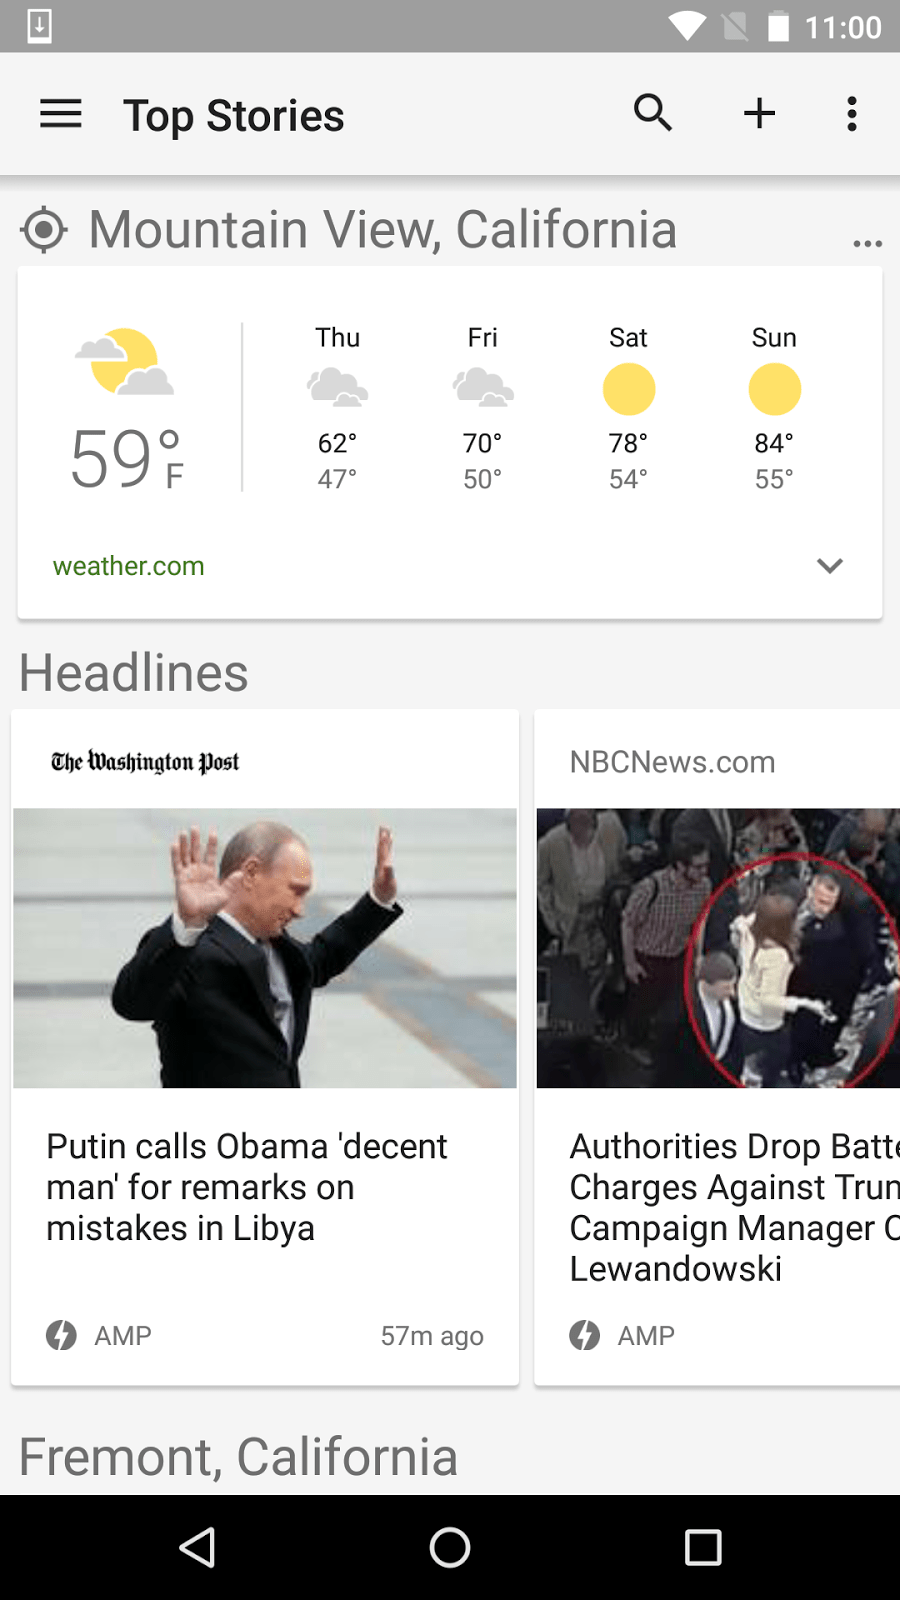 AMP articles in Google News on Android.